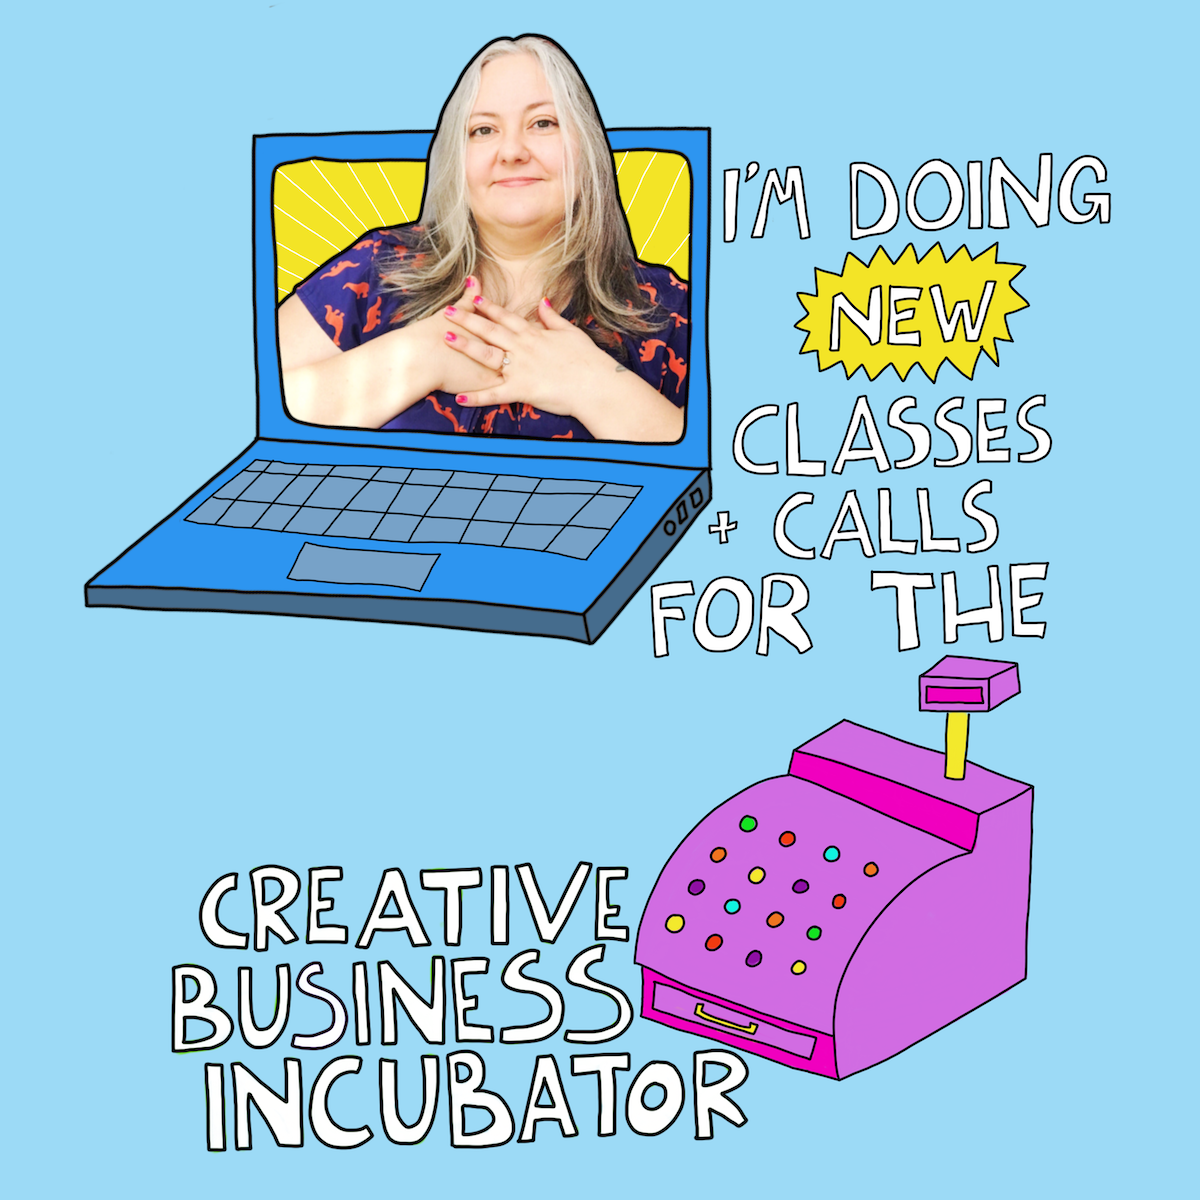 New Classes + Calls for the Creative Business Incubator